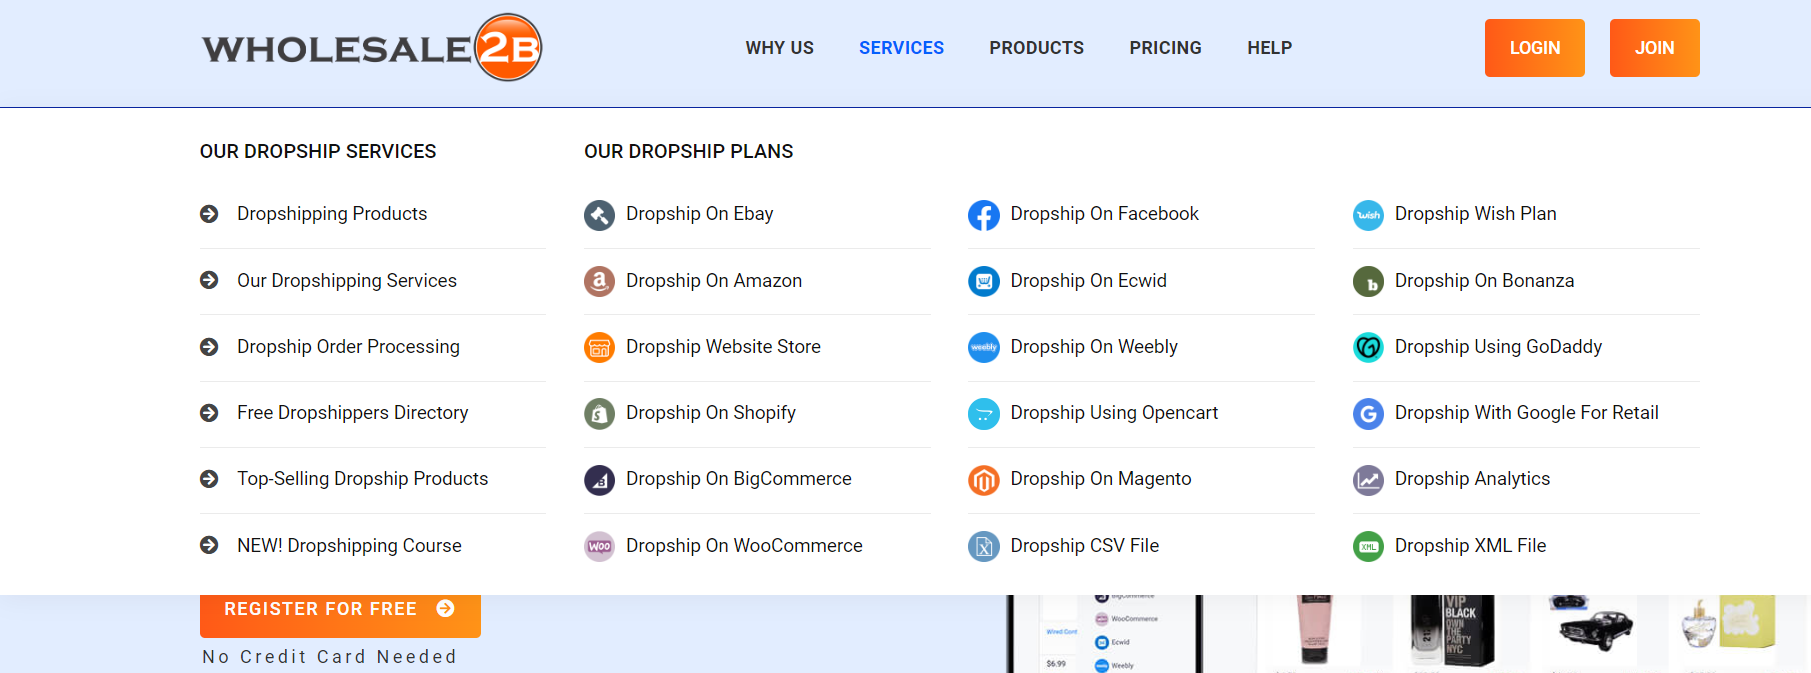 Wholeale2B navigation doesn't yet show the new dropshipping integration or service.